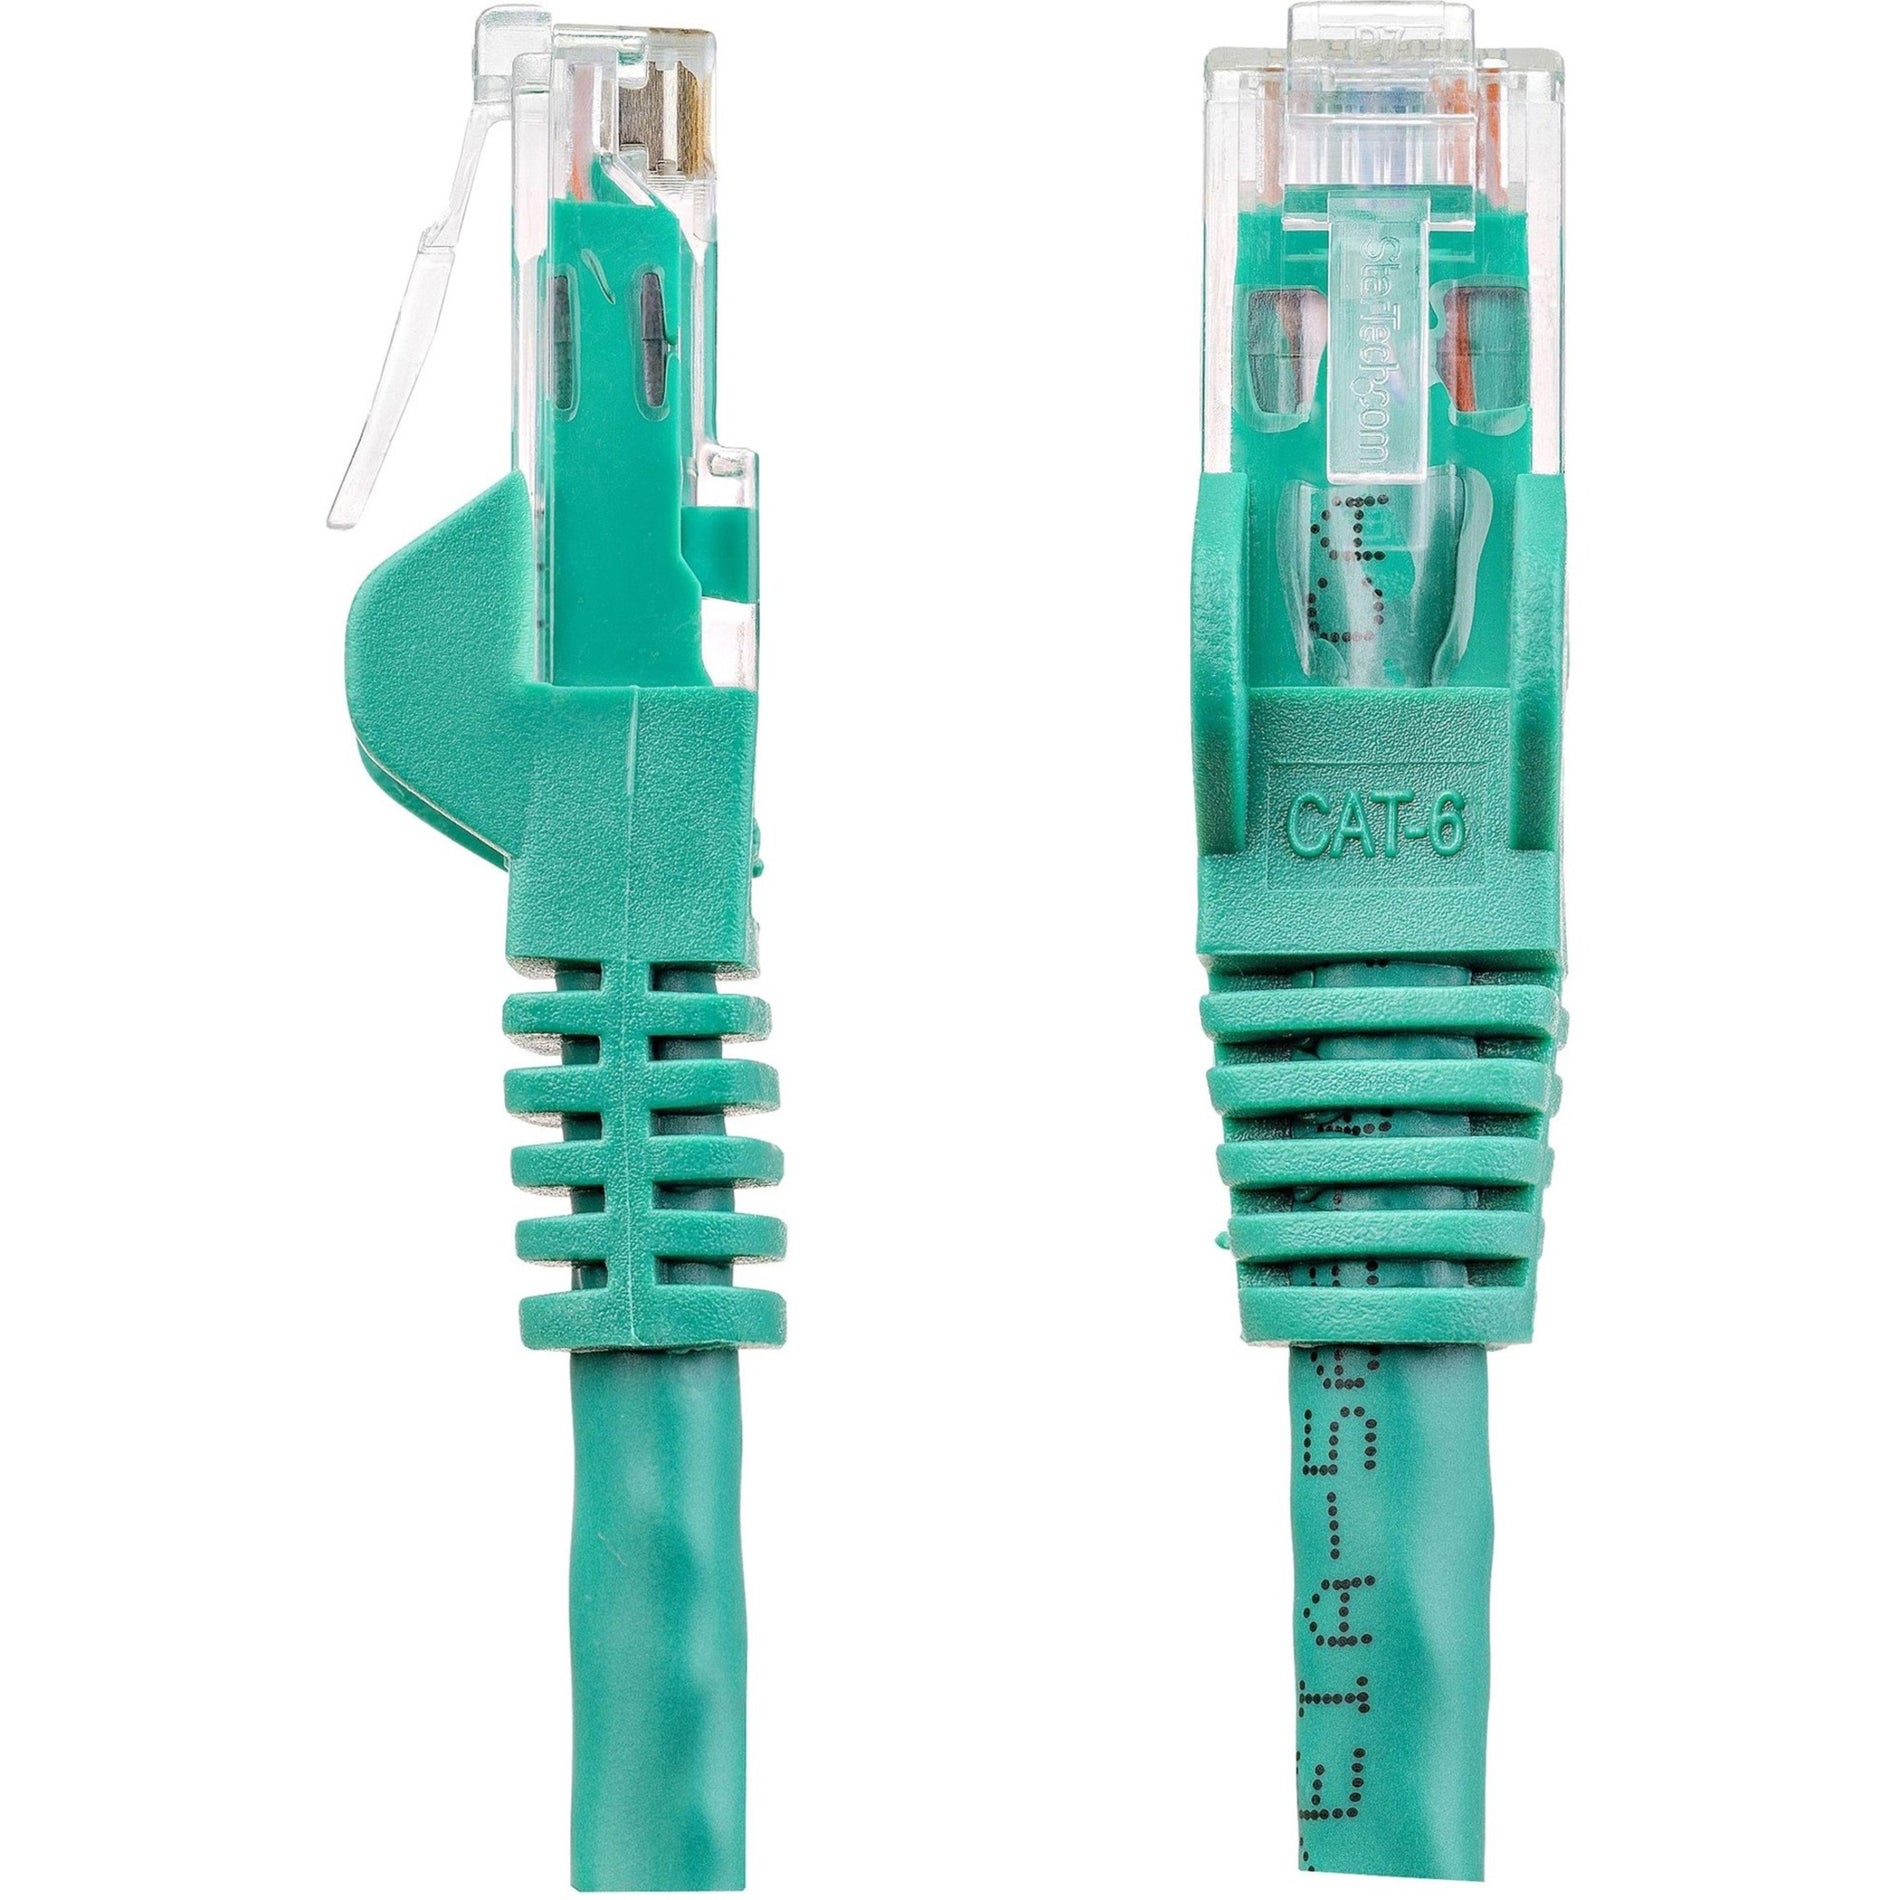 StarTech.com N6PATCH14GN Cat6 Patch Cable, 14ft Green Ethernet Cable, Snagless RJ45 Connectors